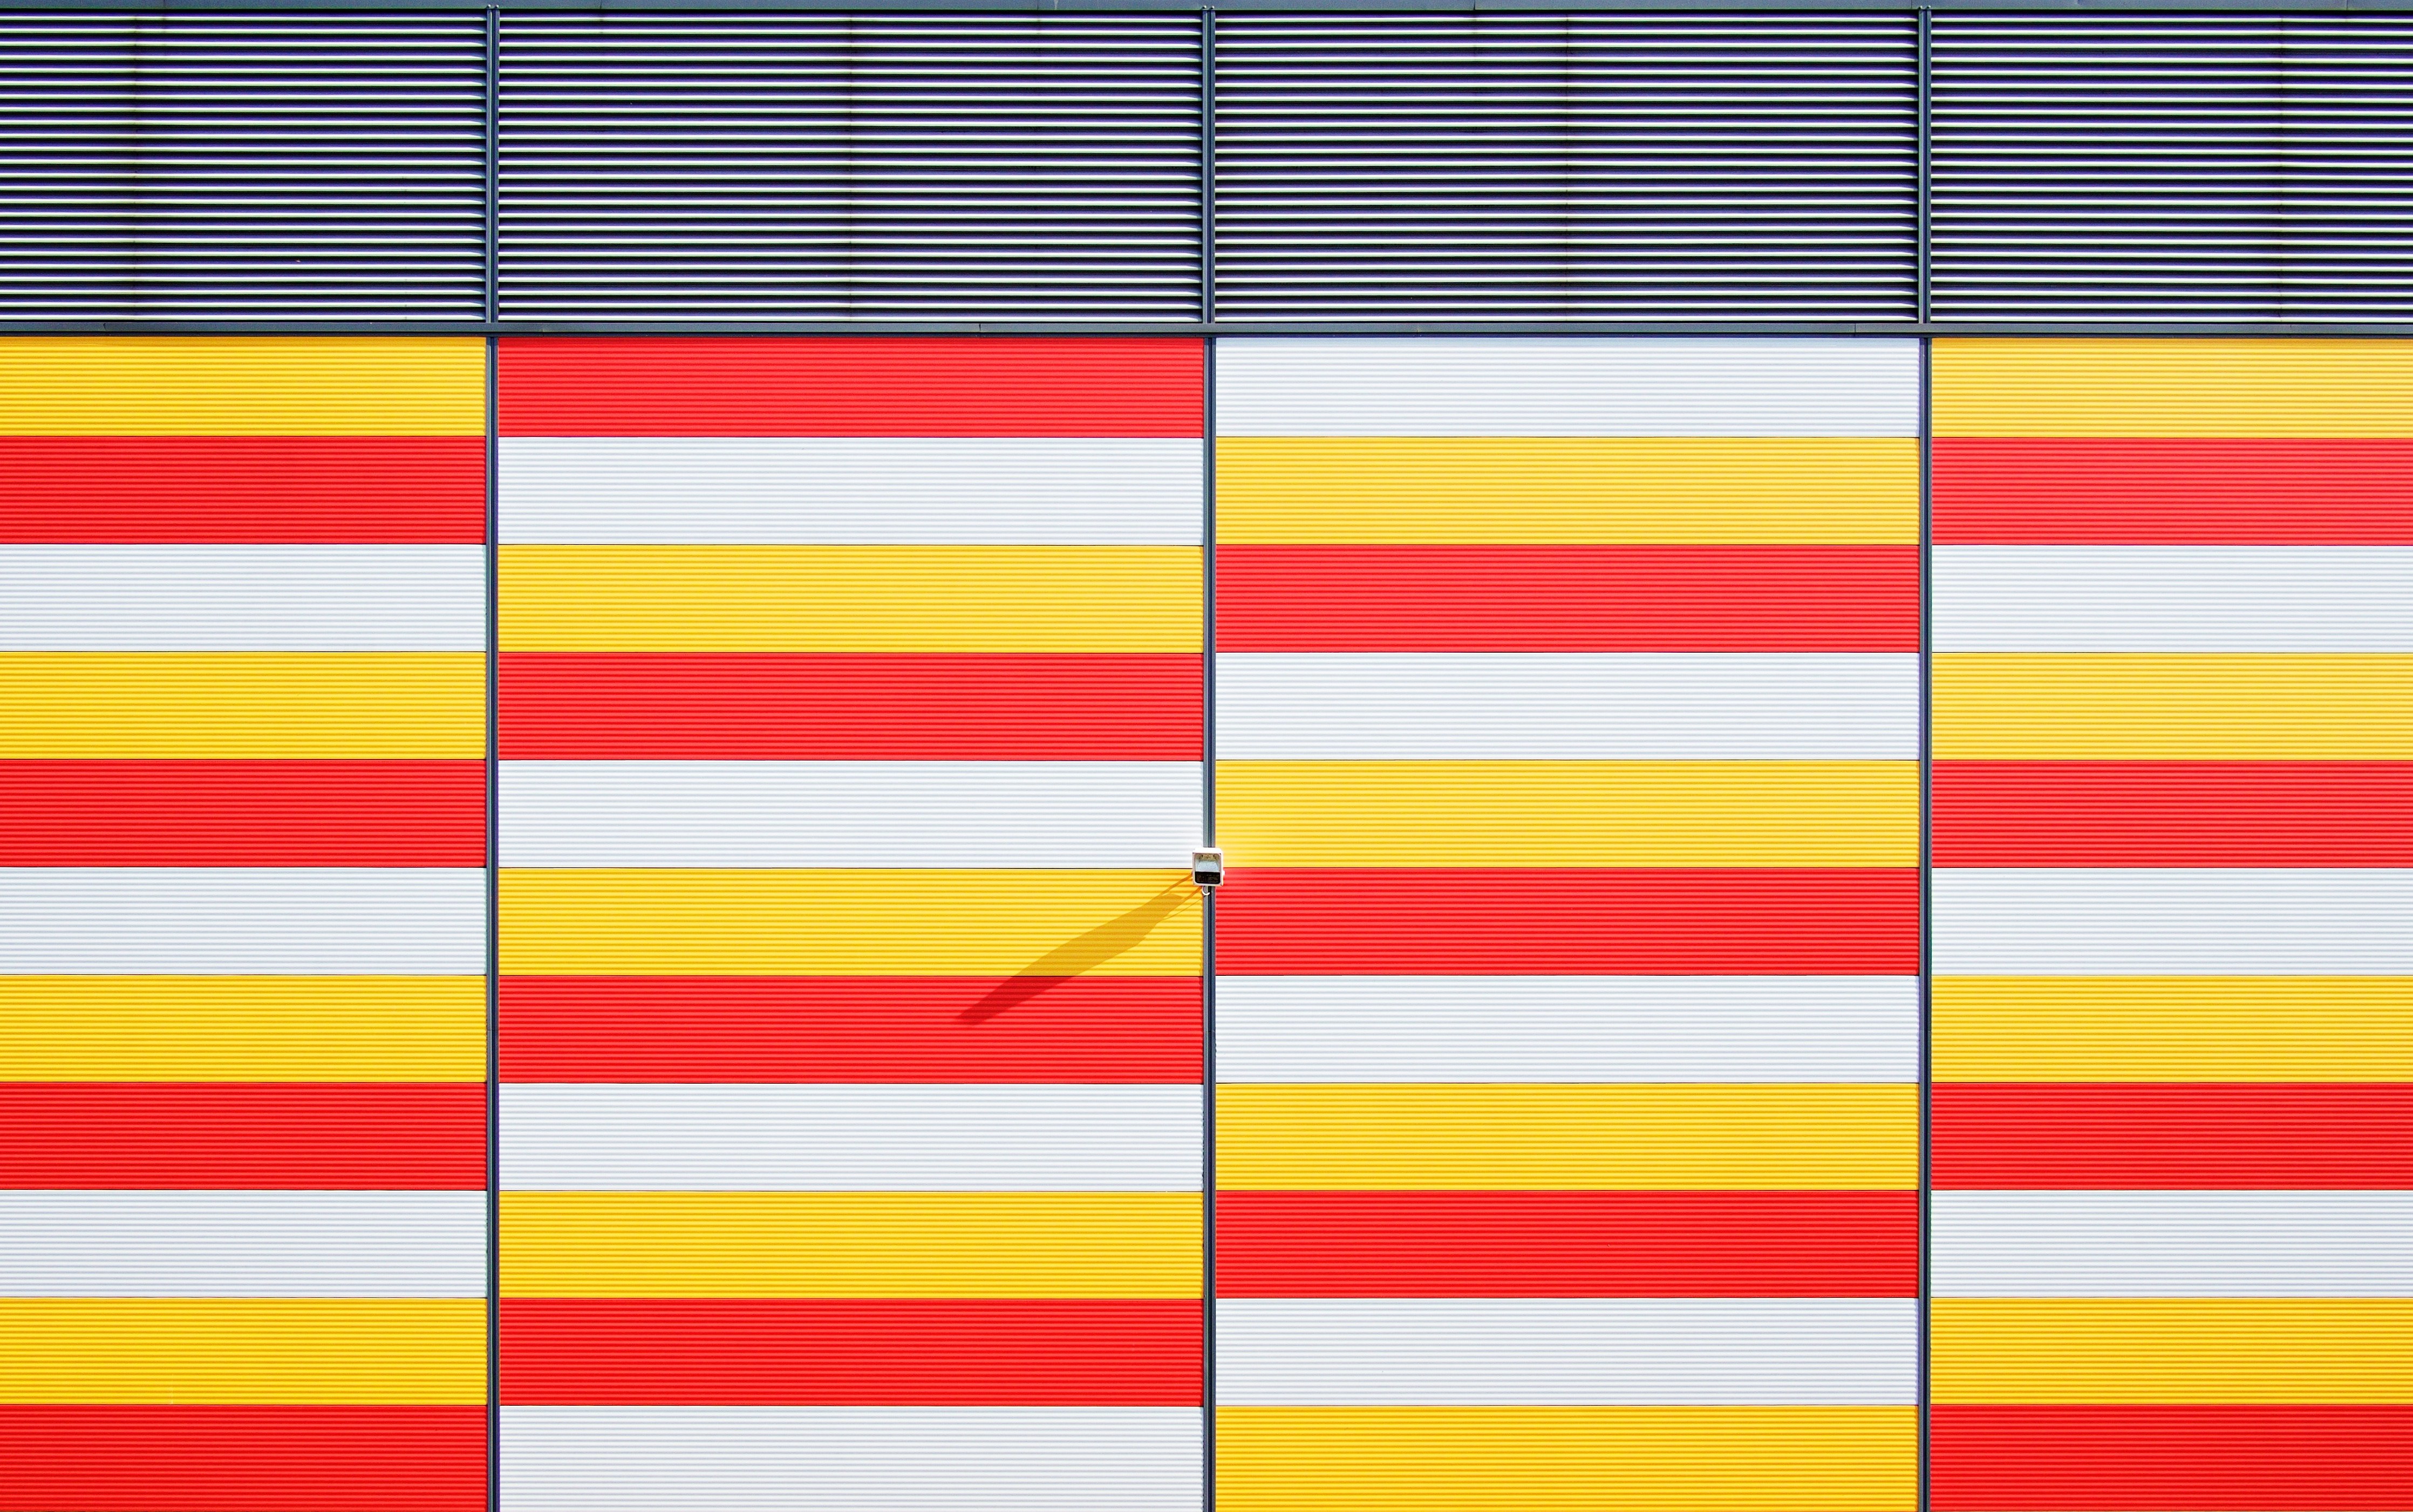 white, red, and yellow striped bars